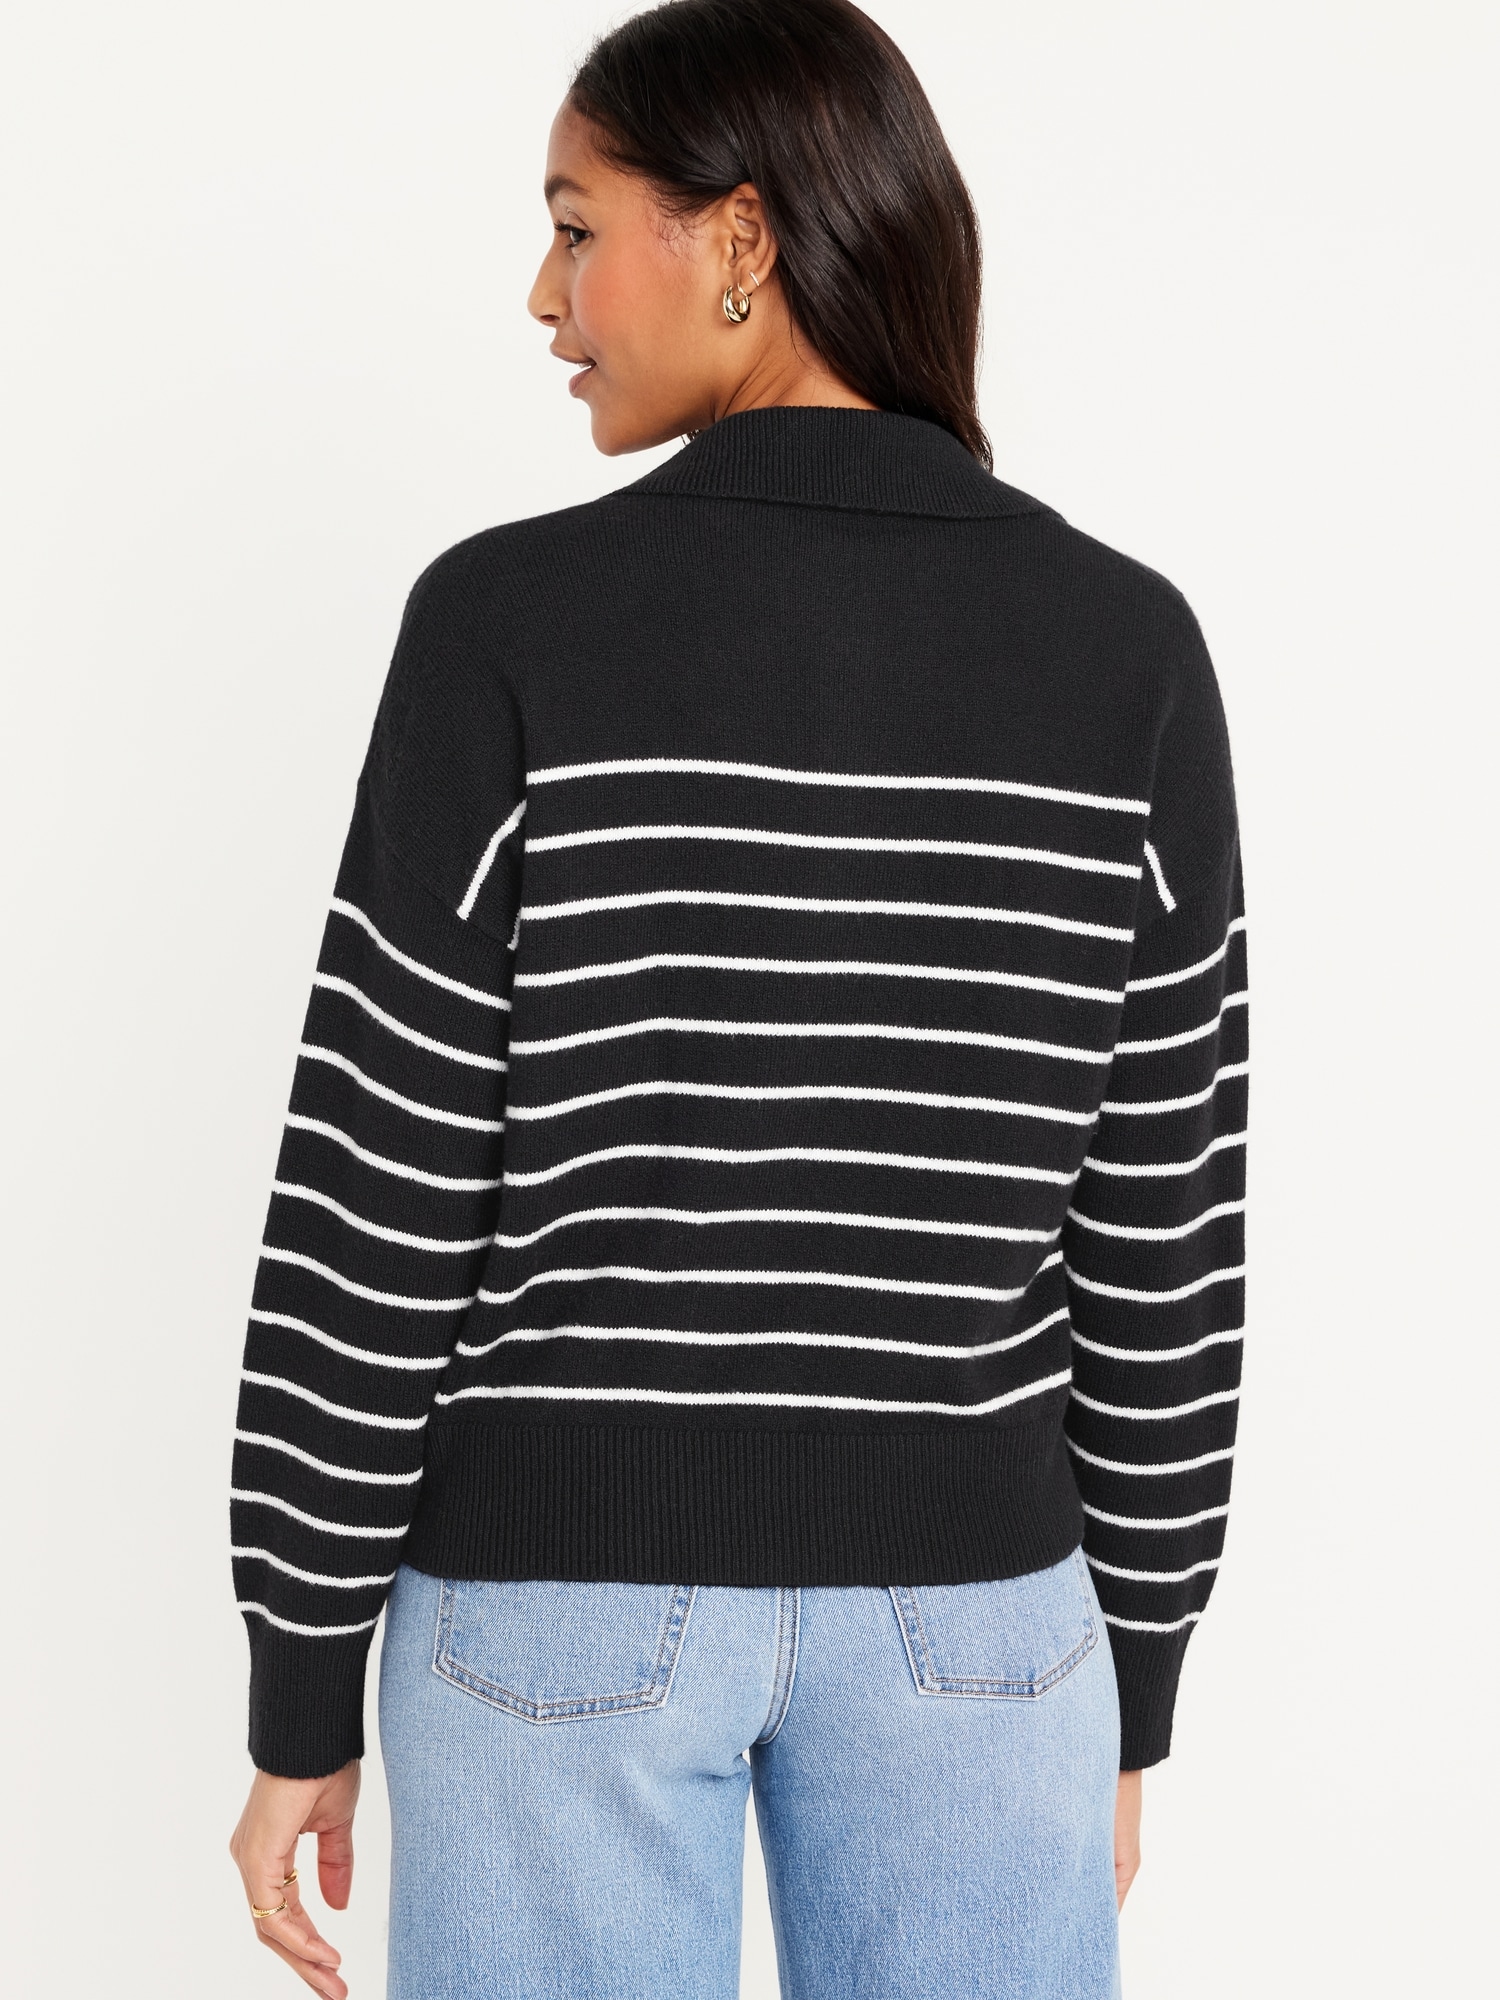 SoSoft Collared Sweater | Old Navy